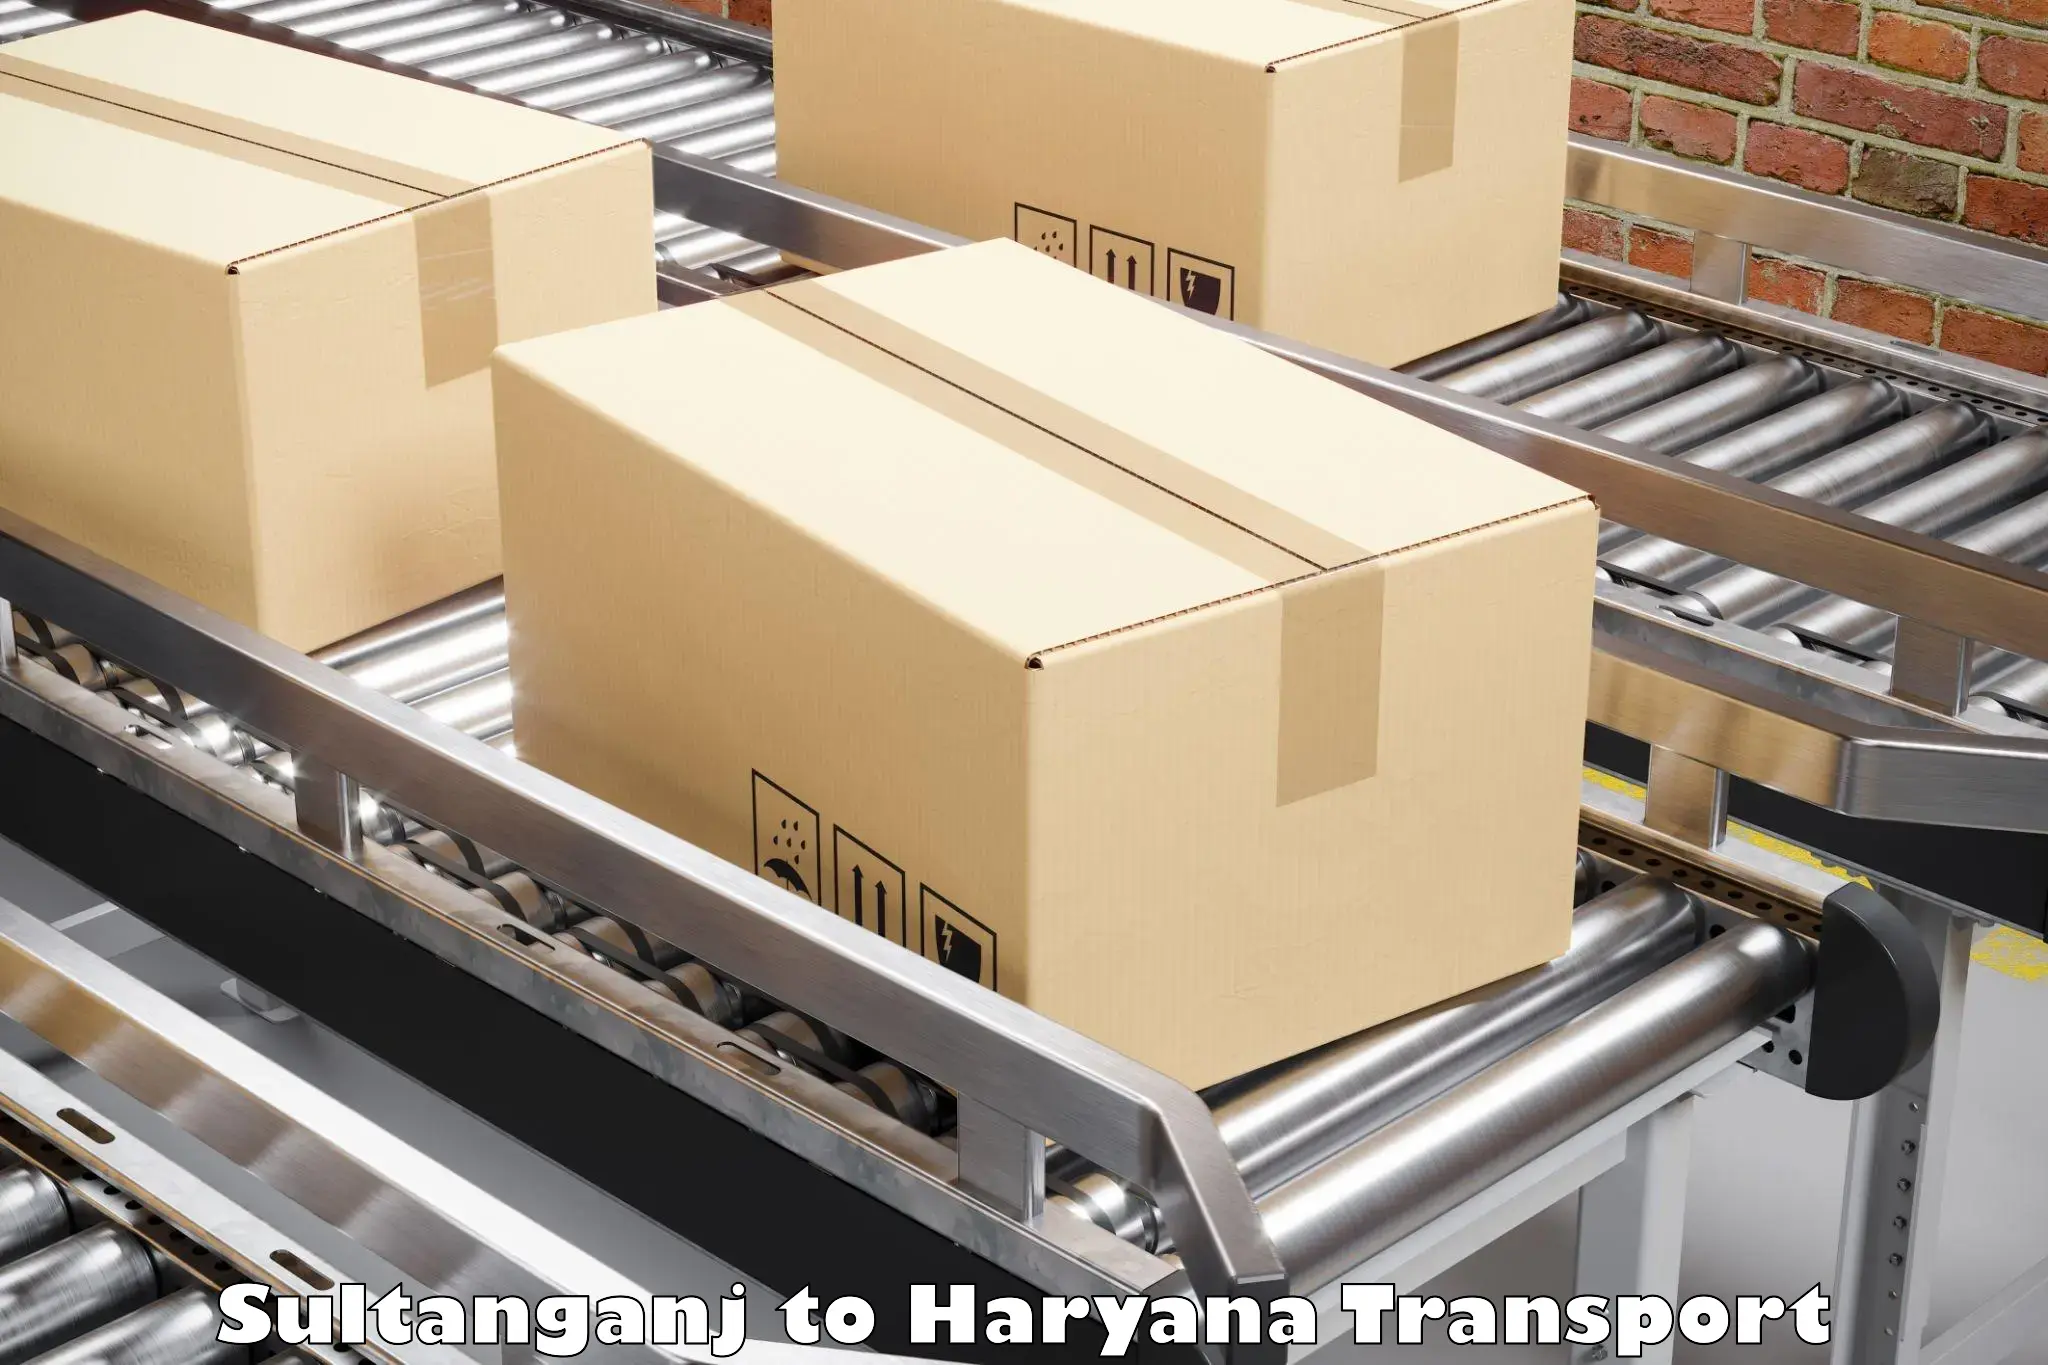 Container transport service Sultanganj to Haryana